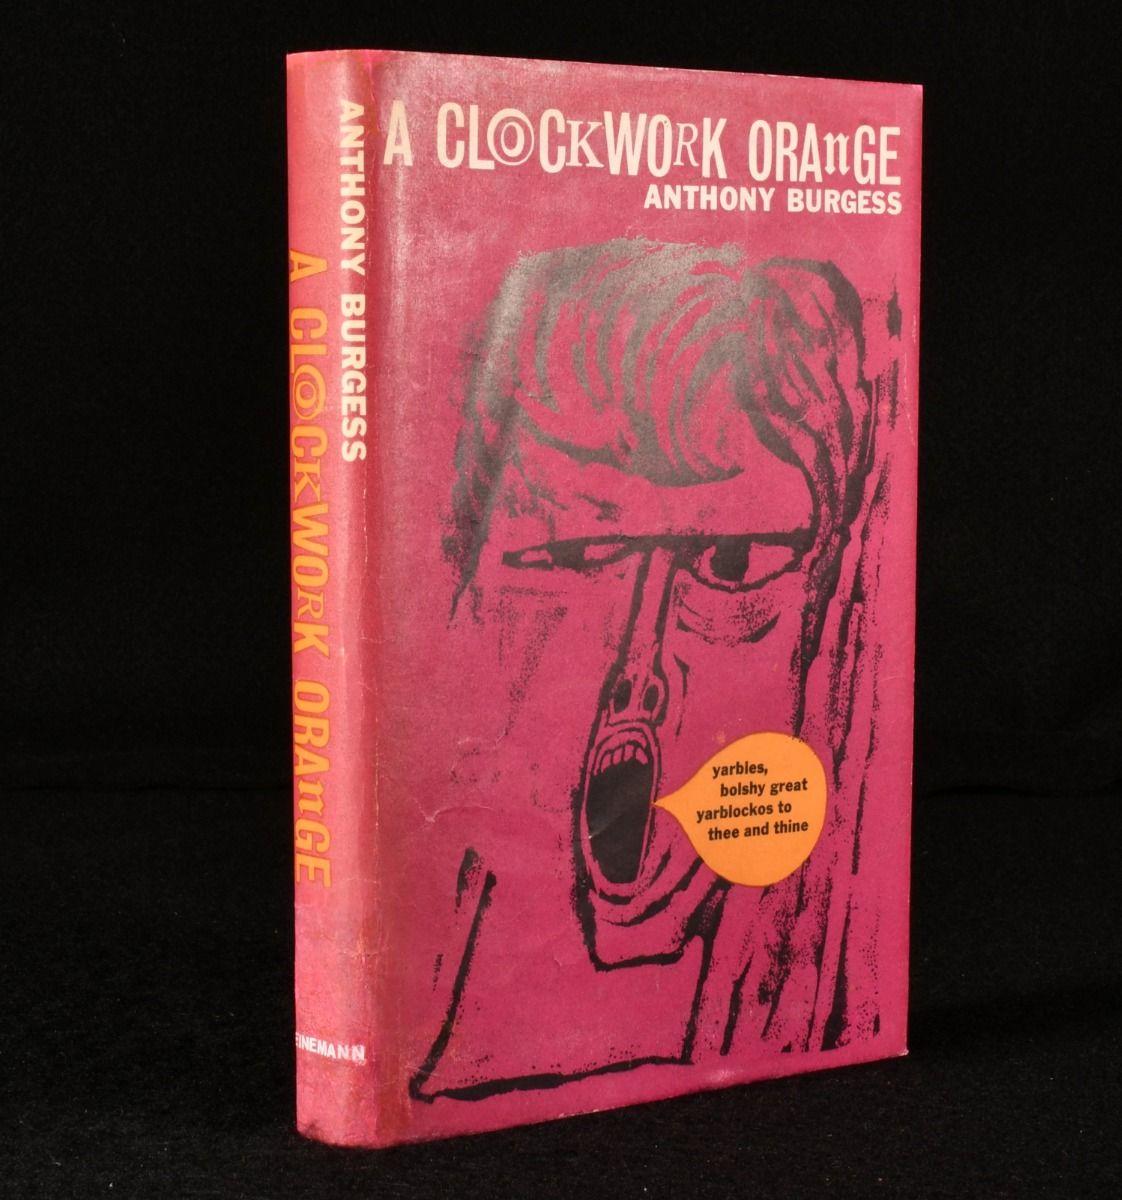 An uncommon, first edition copy of Anthony Burgess' celebrated novel, his jeu d'espirit, 'A Clockwork Orange'.

A first edition, first issue of this canonical novel. A novel known for its use of 'Nadsat' slang, and many time a contentious read,